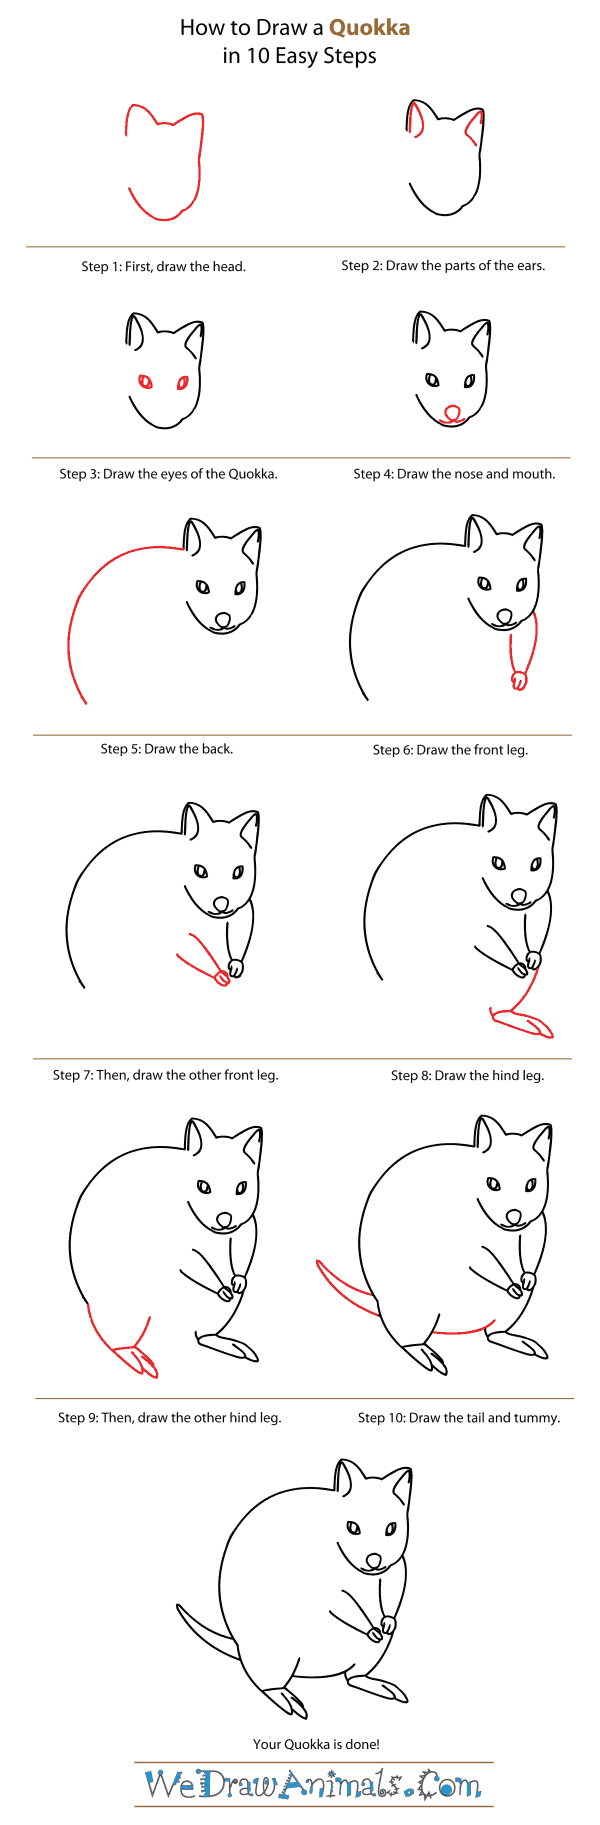 How to Draw a Quokka - Step-By-Step Tutorial